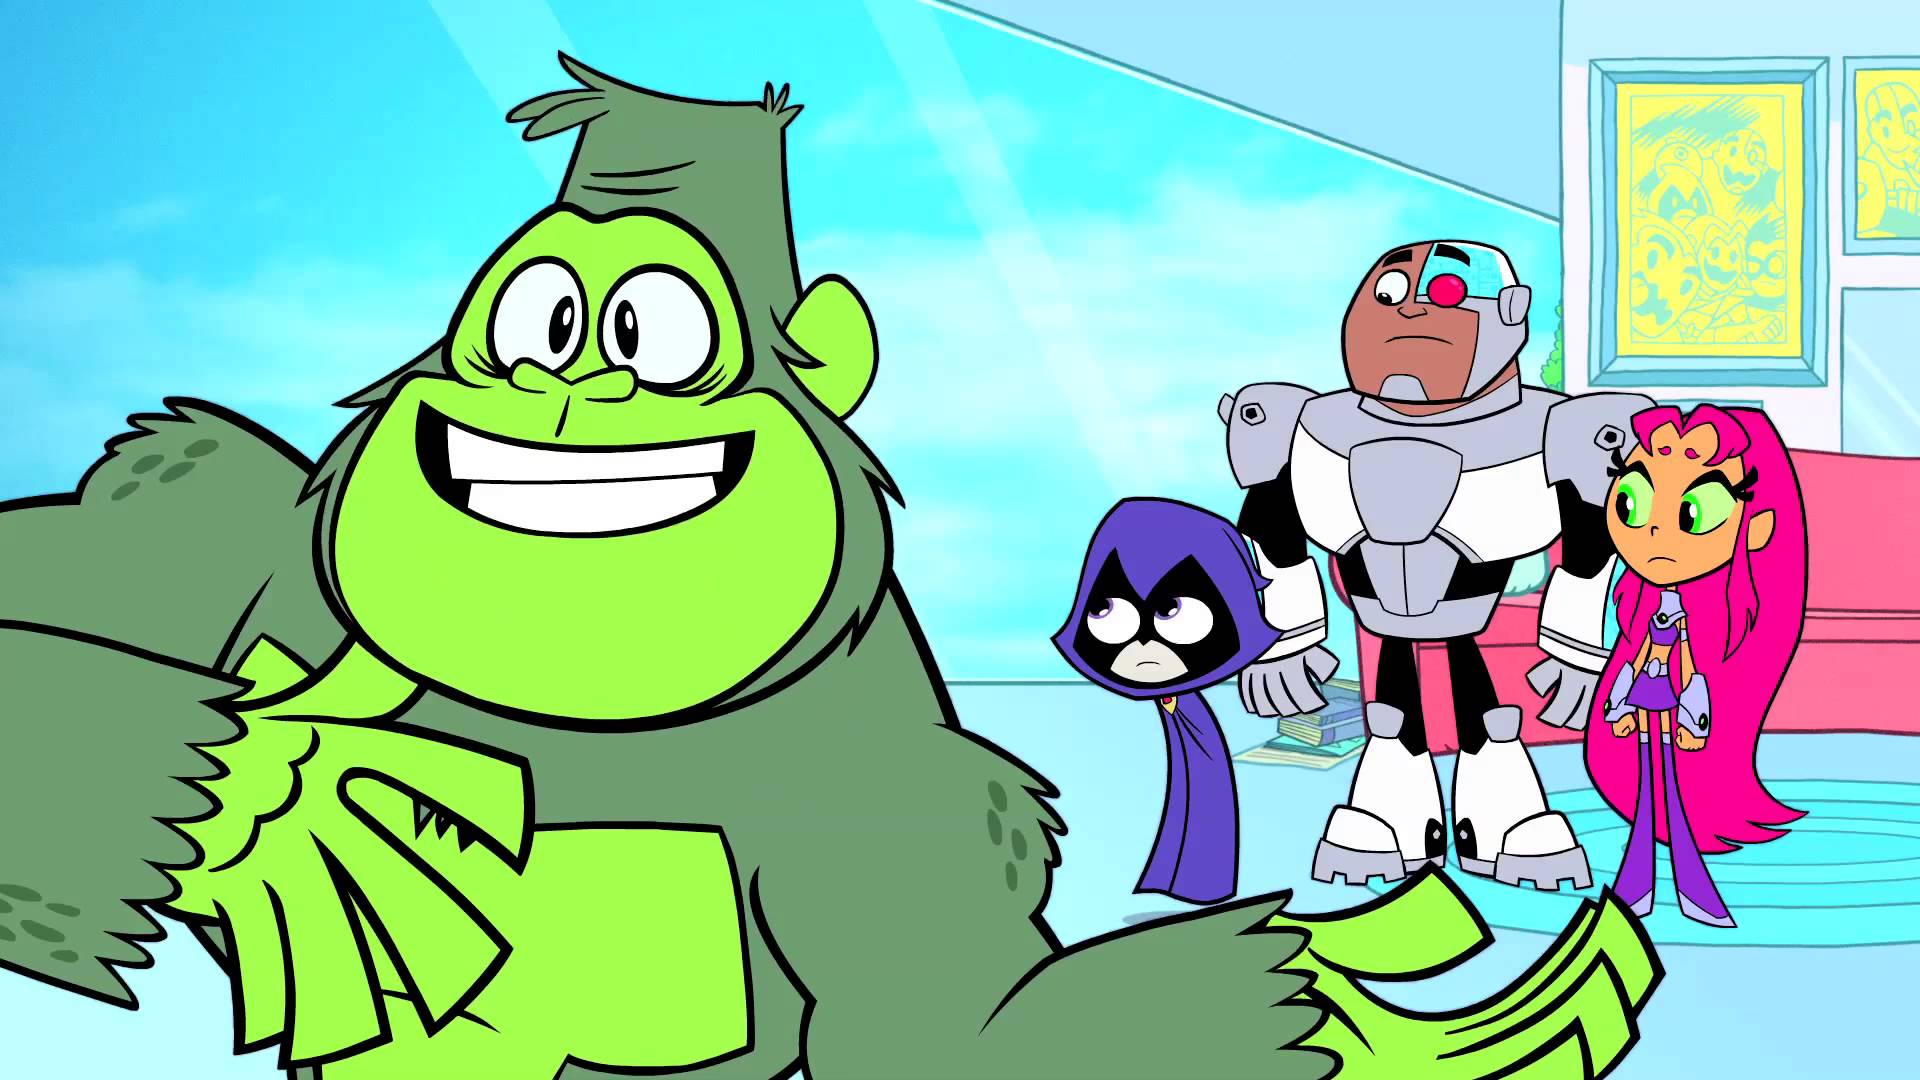 Wallpaper.wiki Free Teen Titans Go Image Download PIC WPE008936